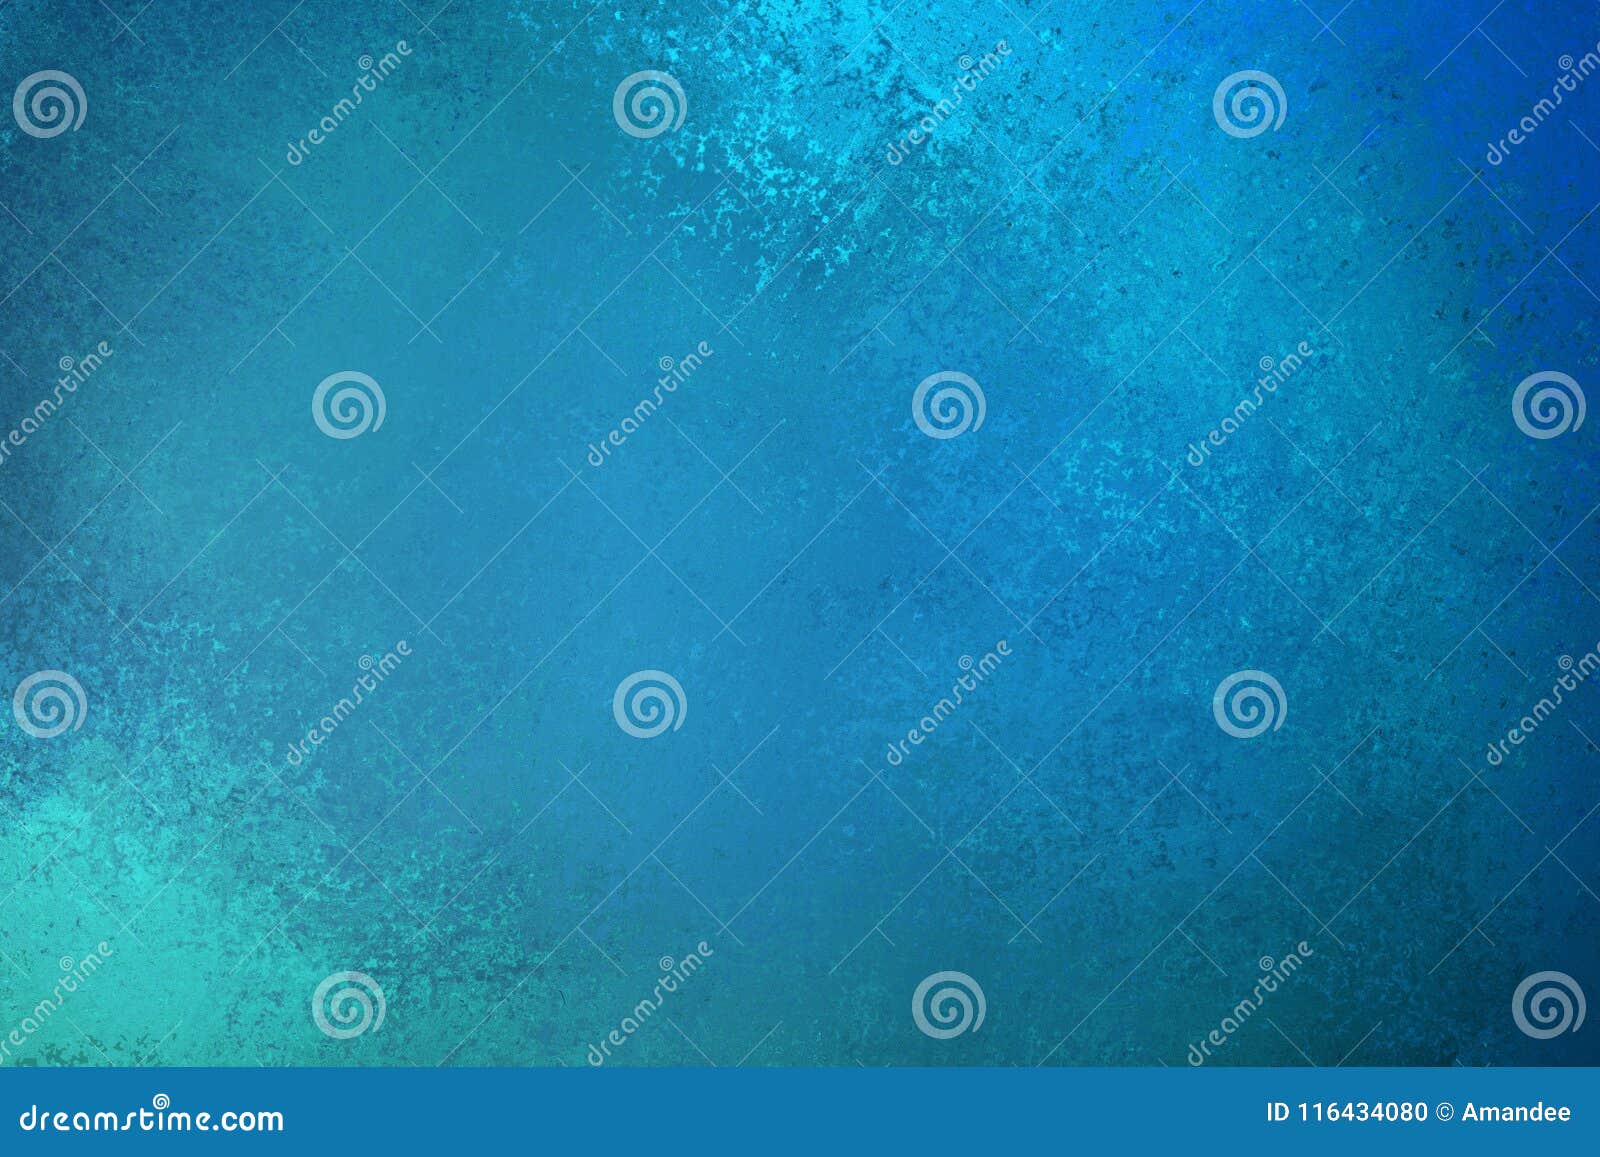 beautiful blue green background  with textured vintage grunge deisng with light and dark teal blue colors and paint